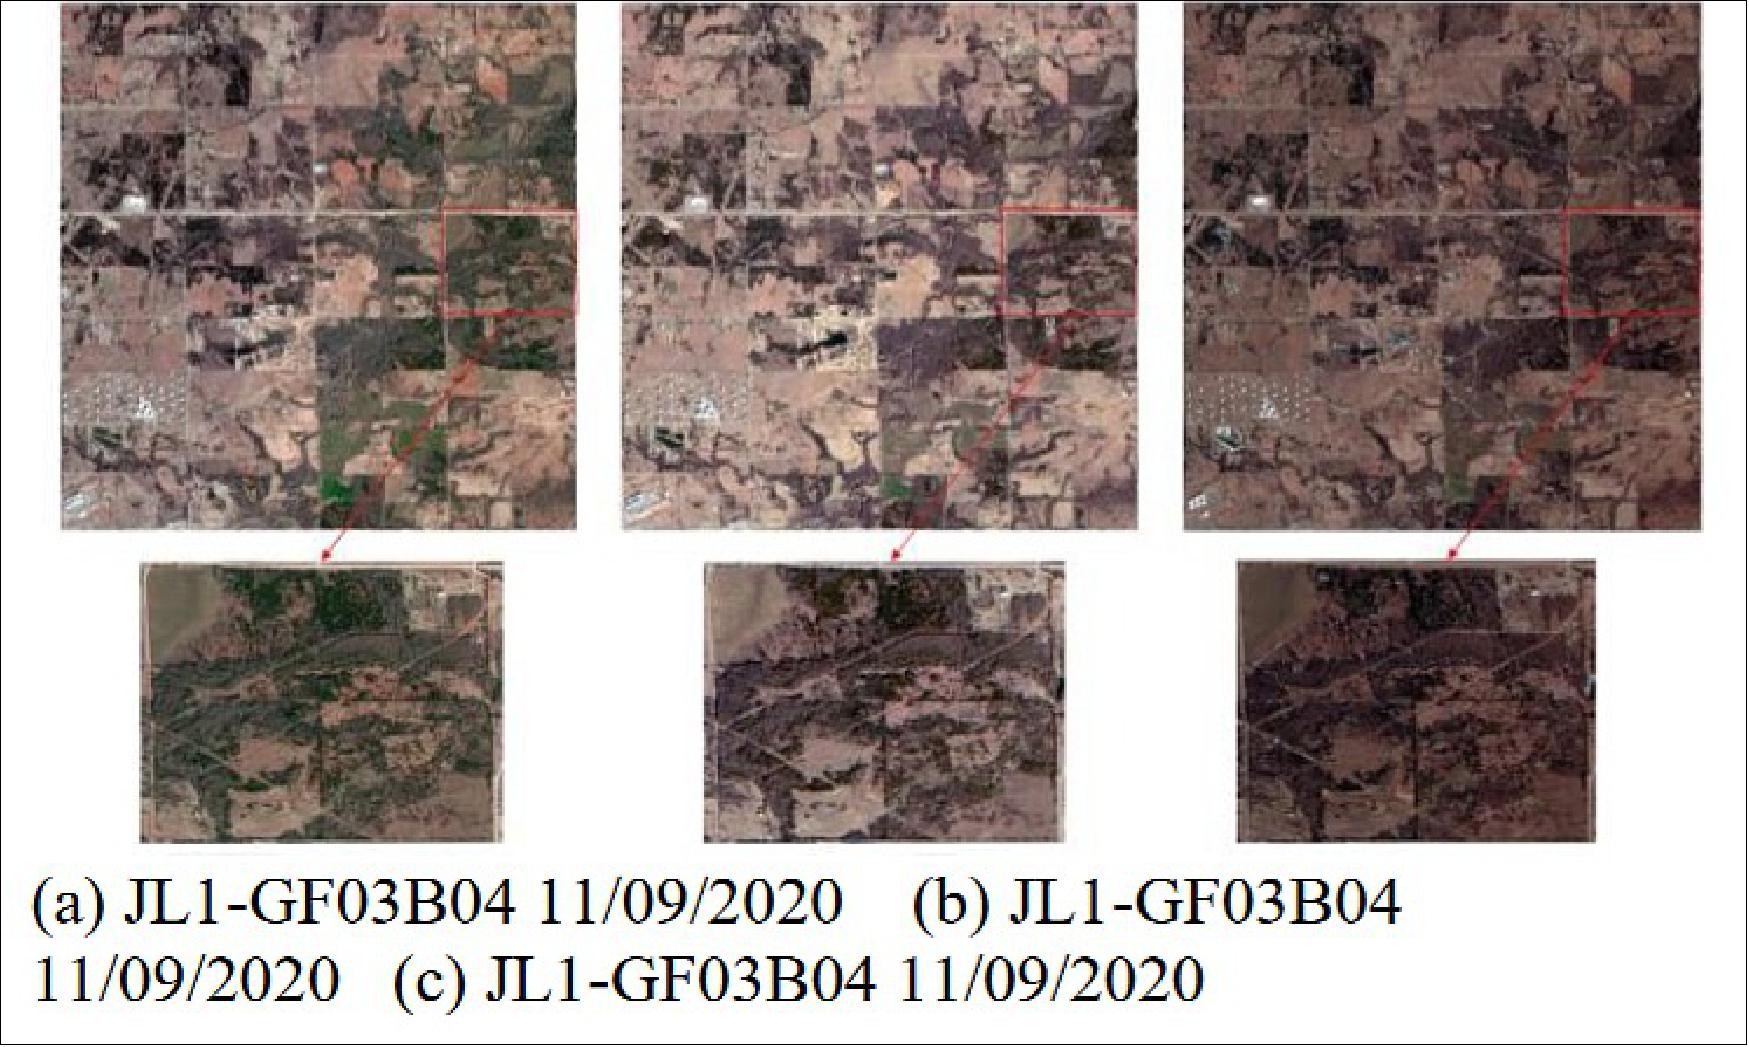 Figure 5: Multi-temporal images(partial) of the US (image credit: CGSTL, HEAD)